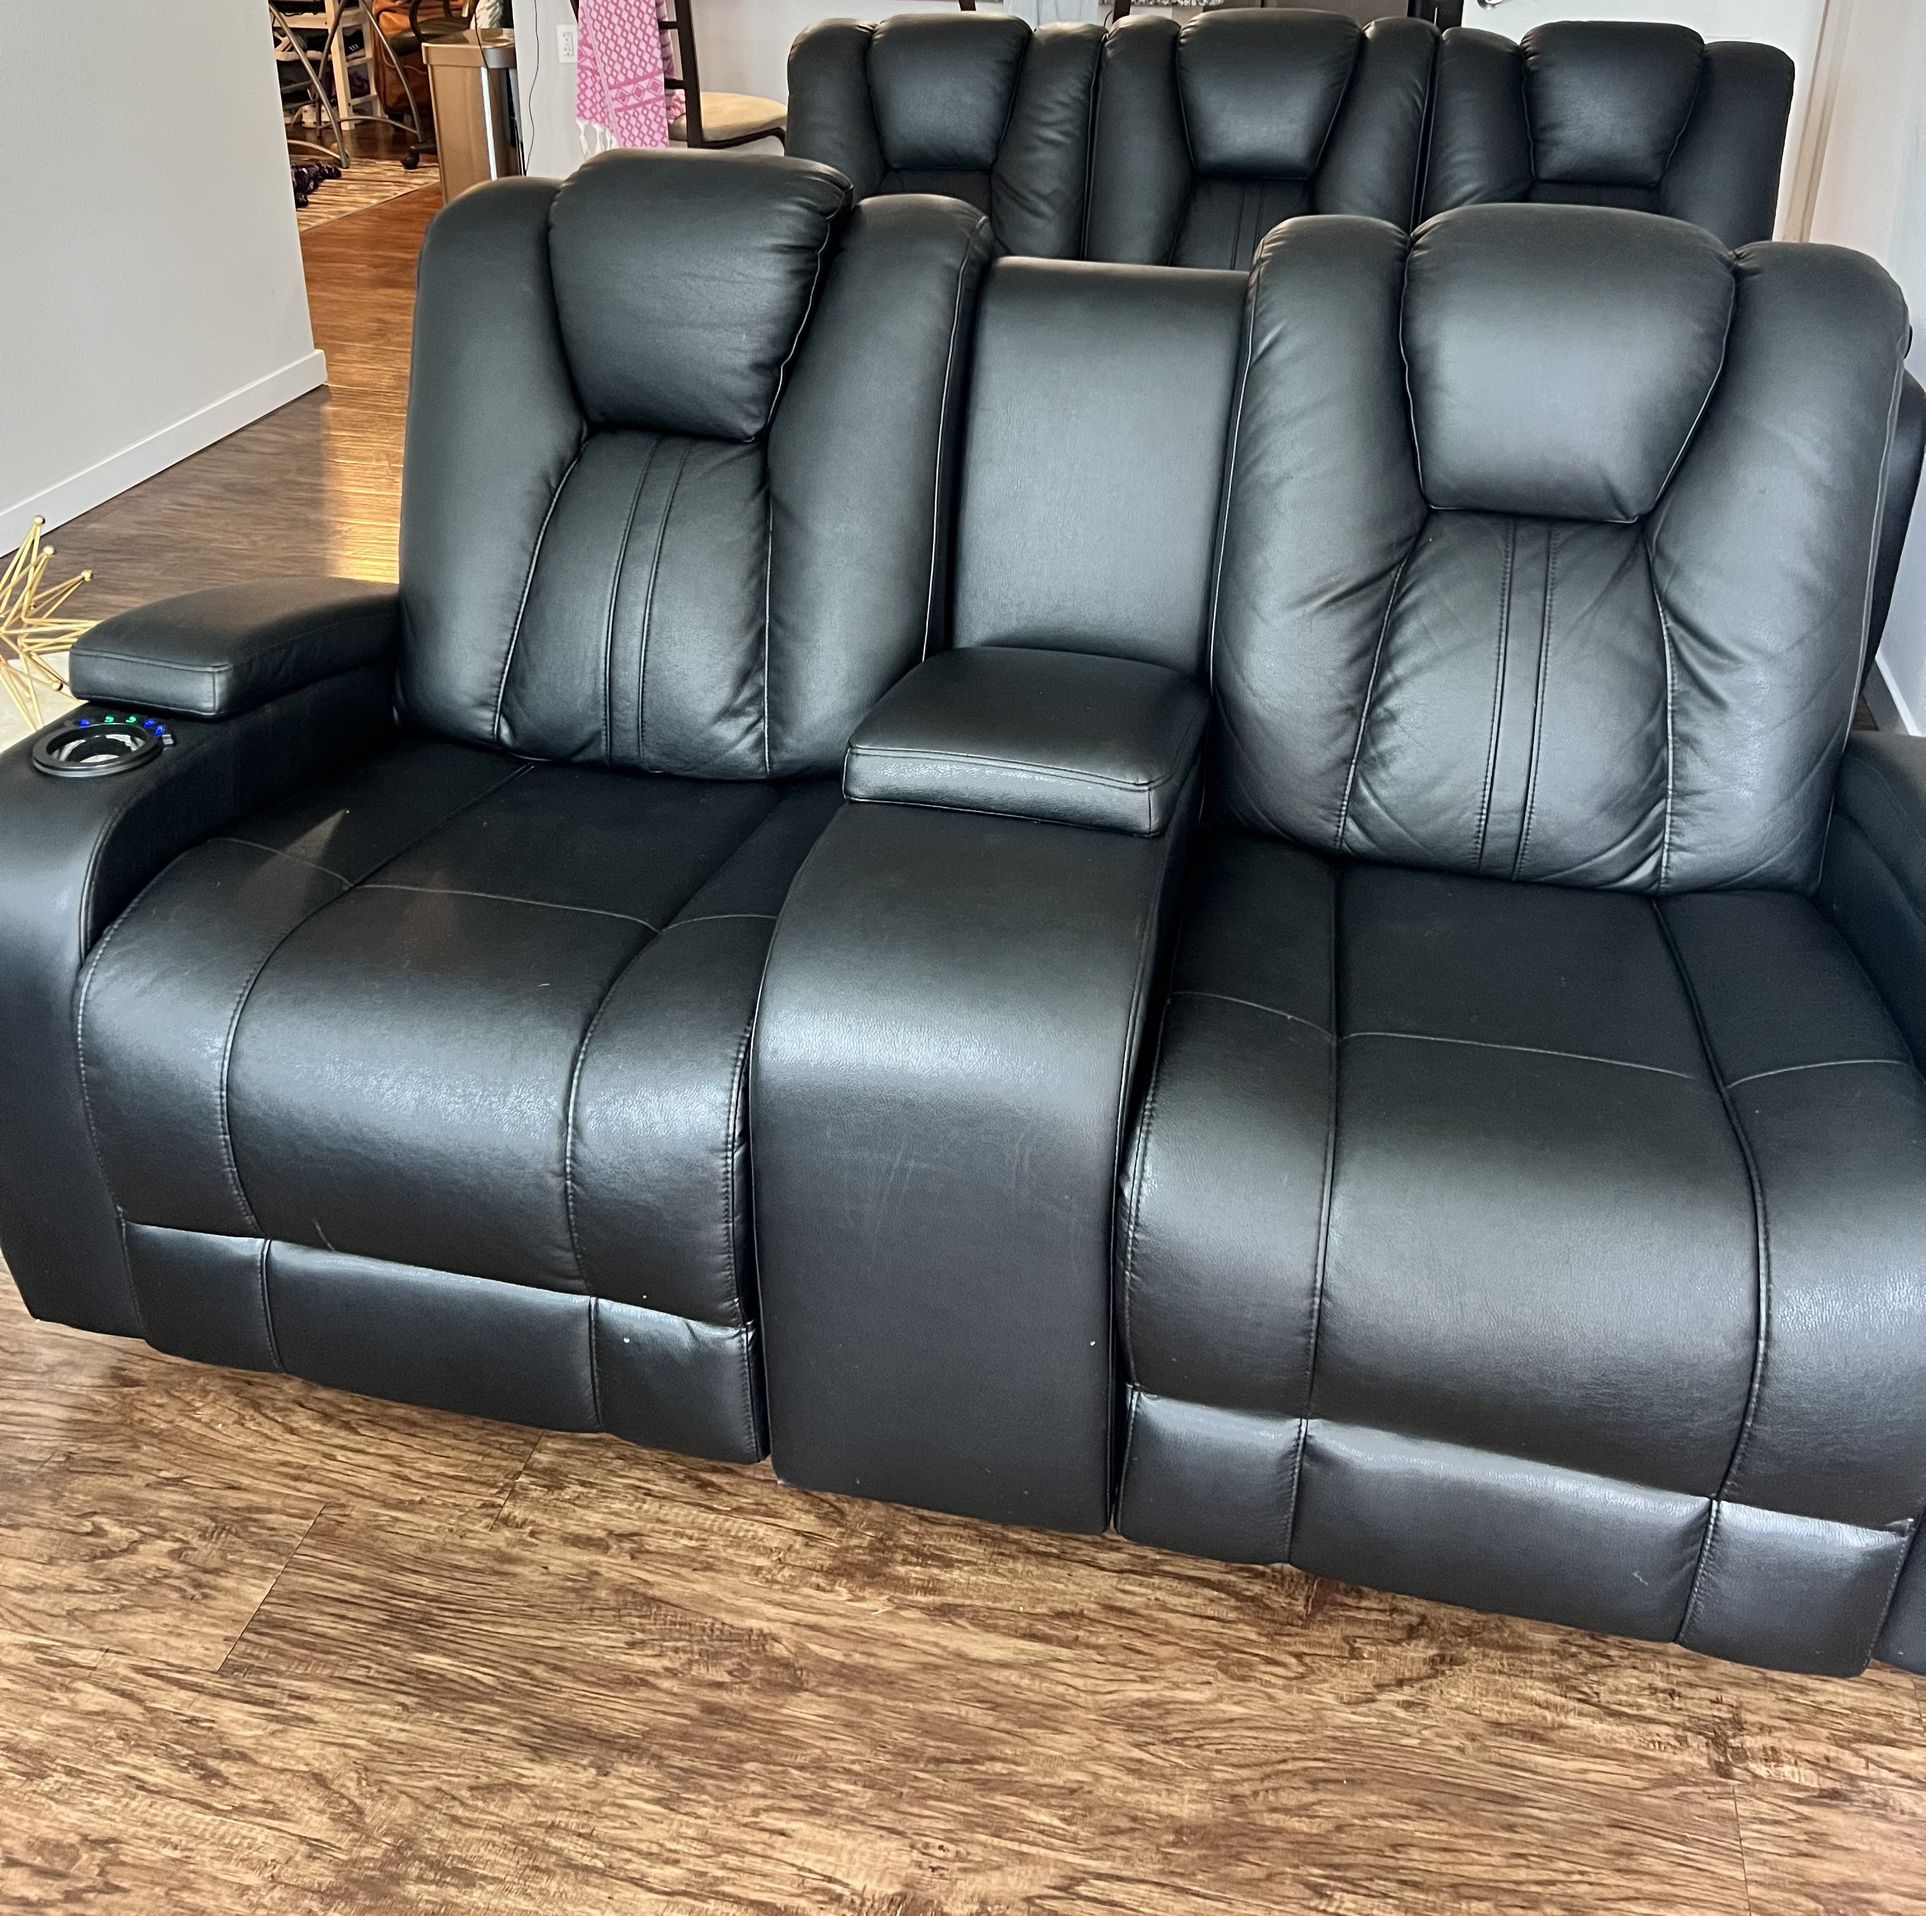 Two Electric Leather Reclining Sofa’s 